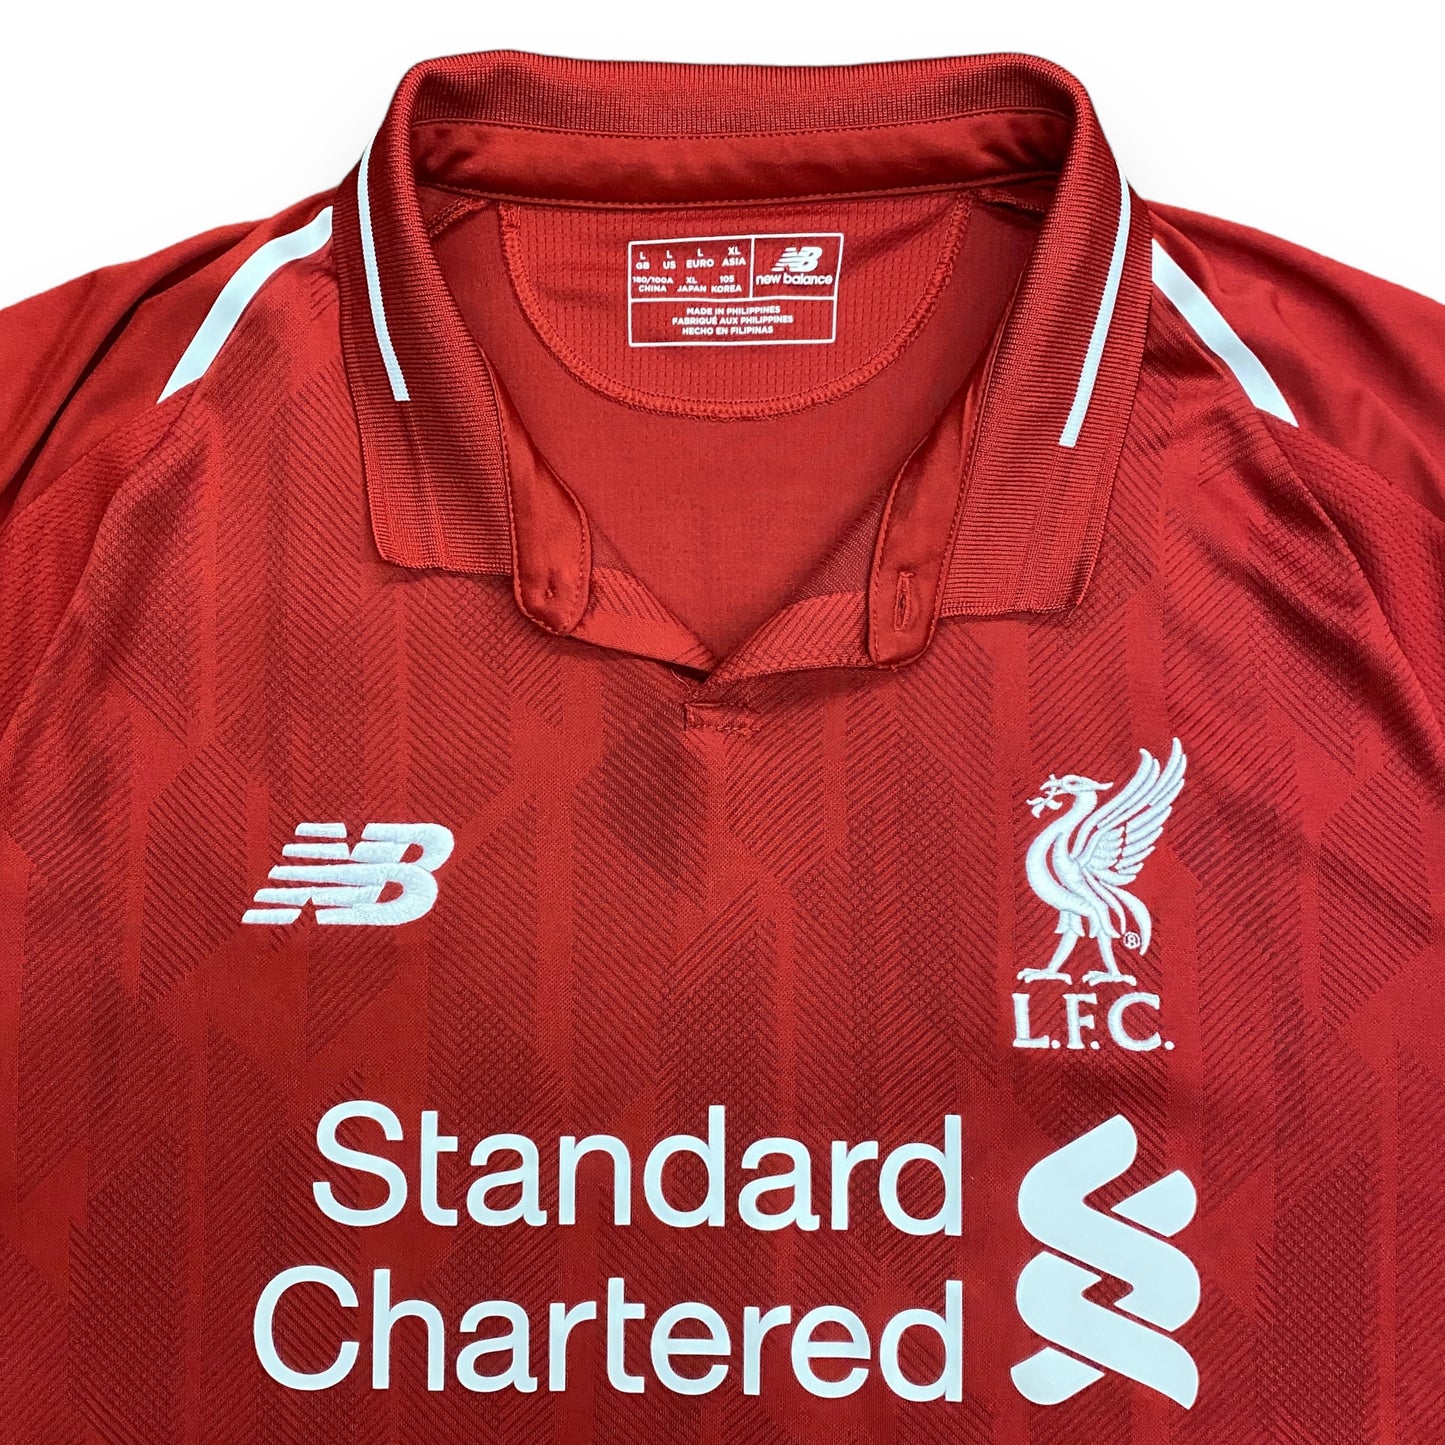 2018/2019 Liverpool FC "M. Salah" Official Soccer Jersey - Size Large